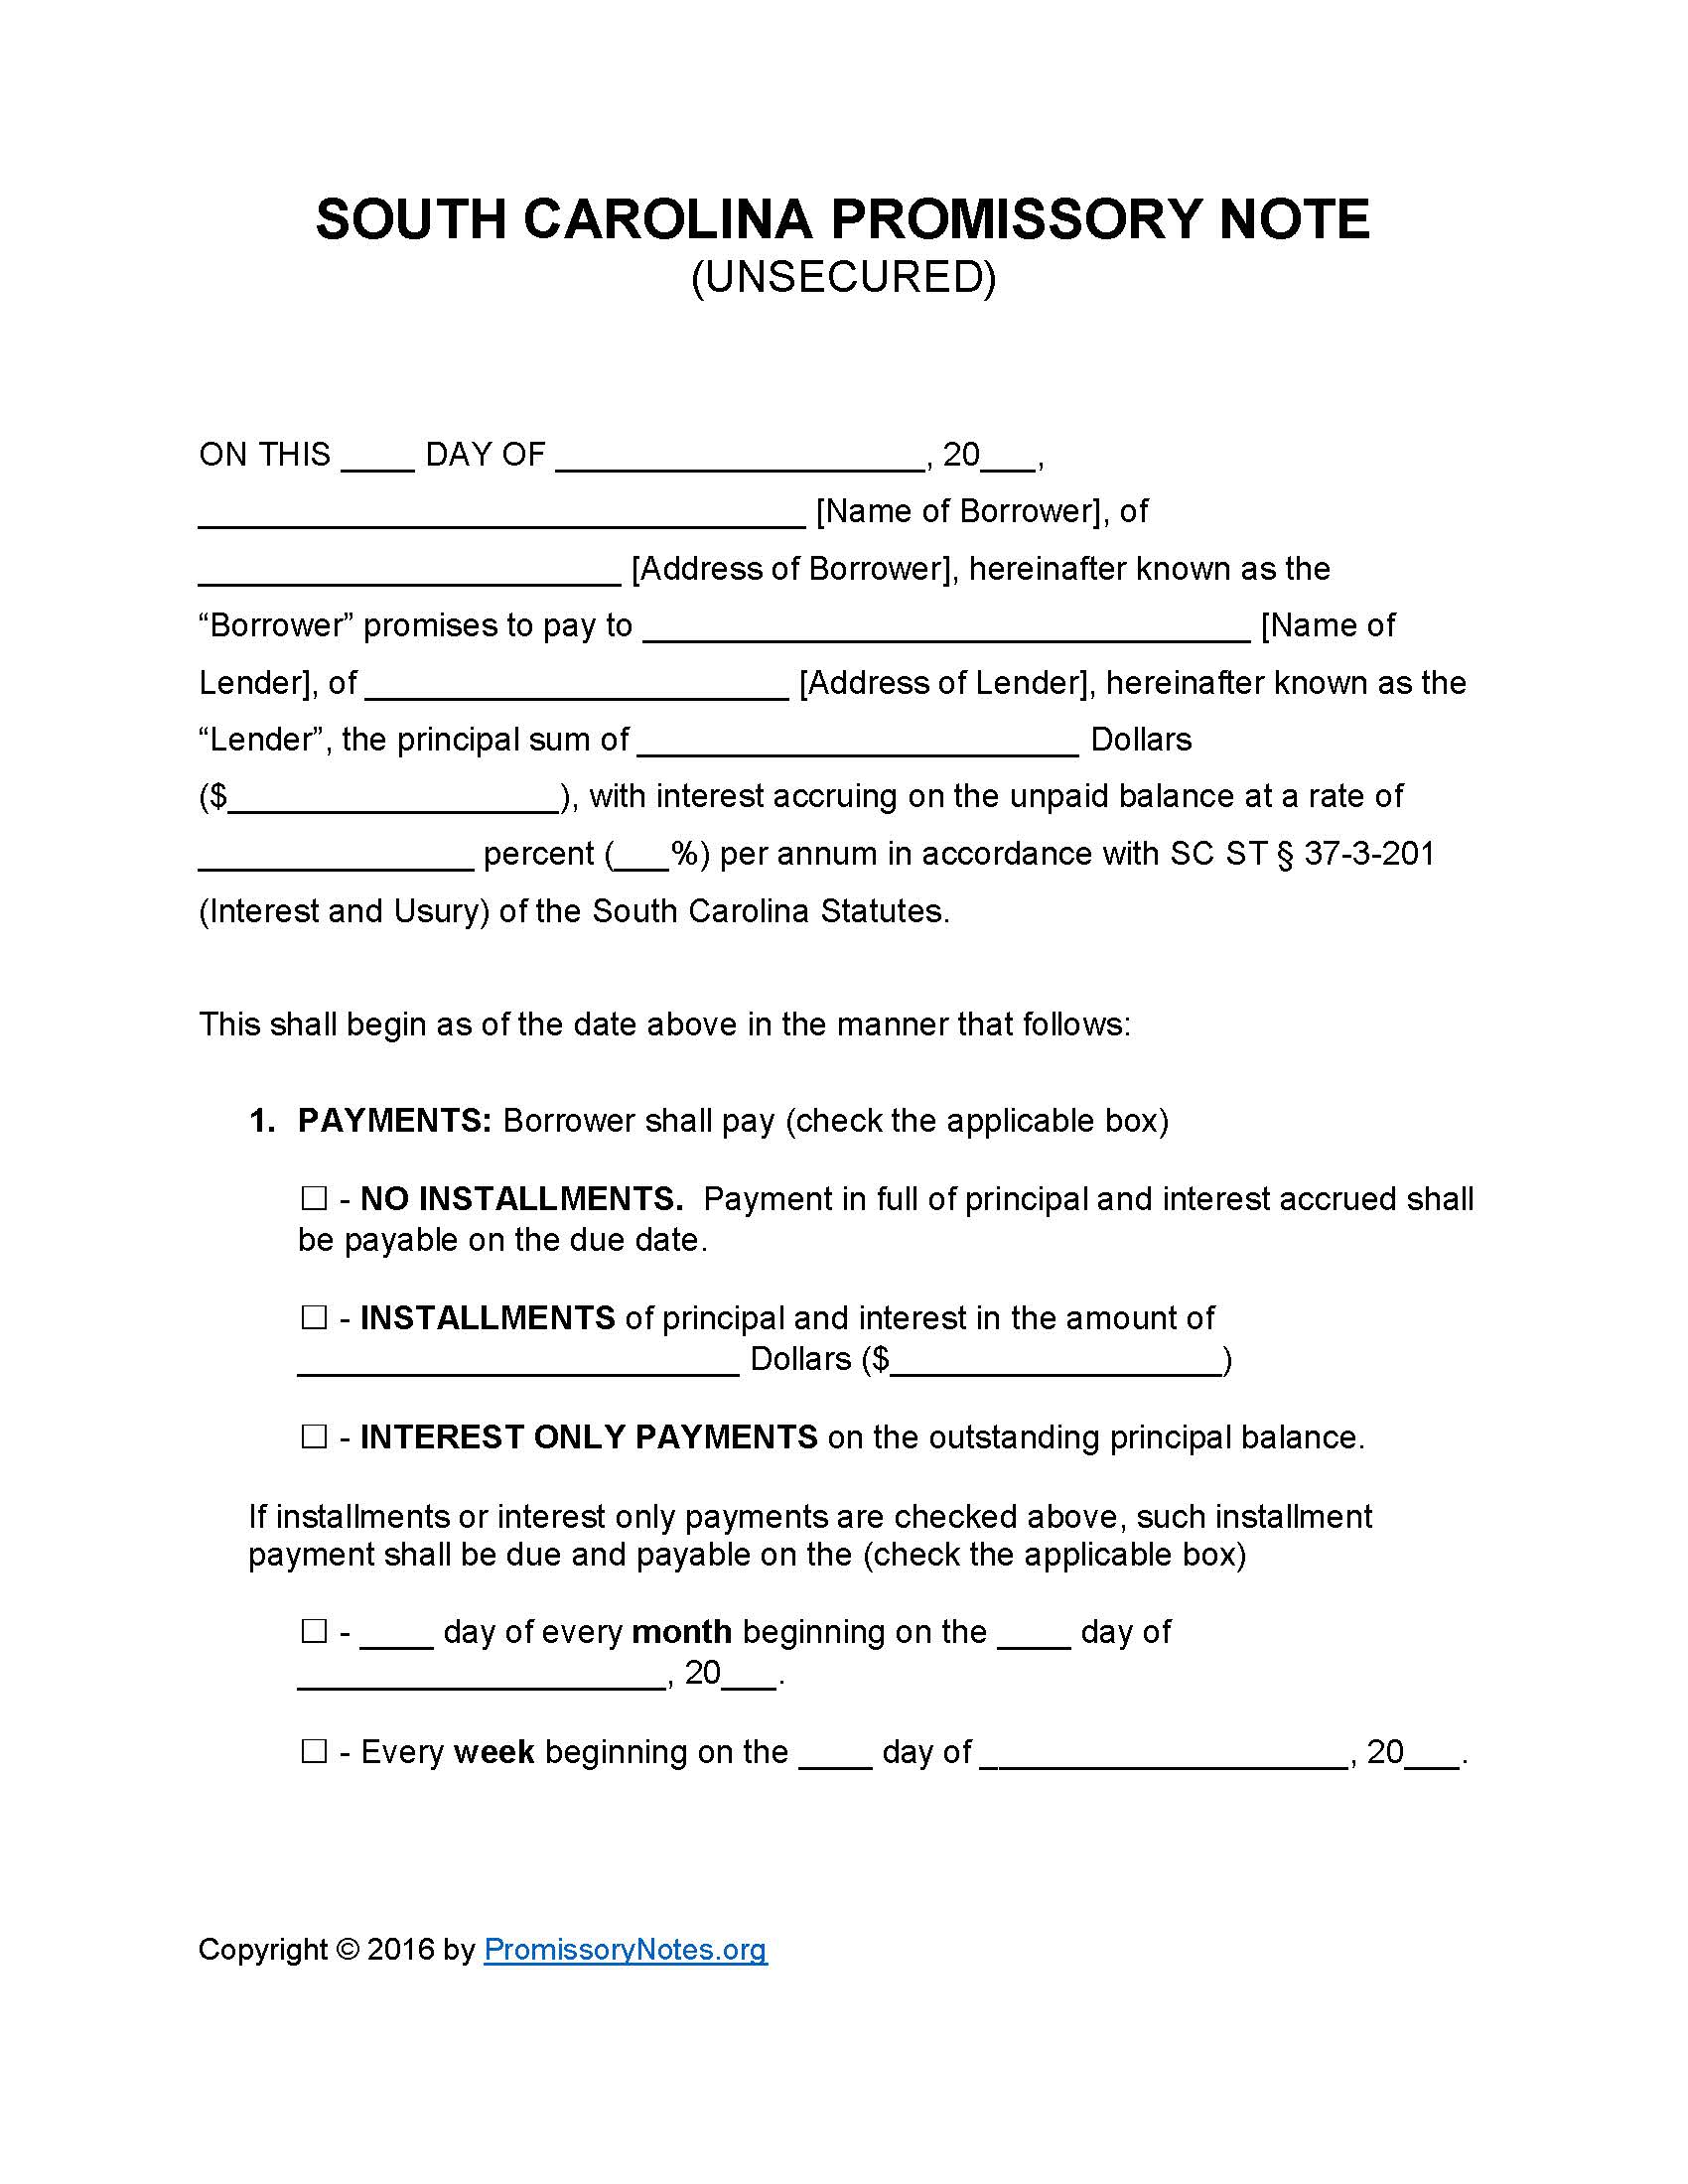 south-carolina-unsecured-promissory-note-form